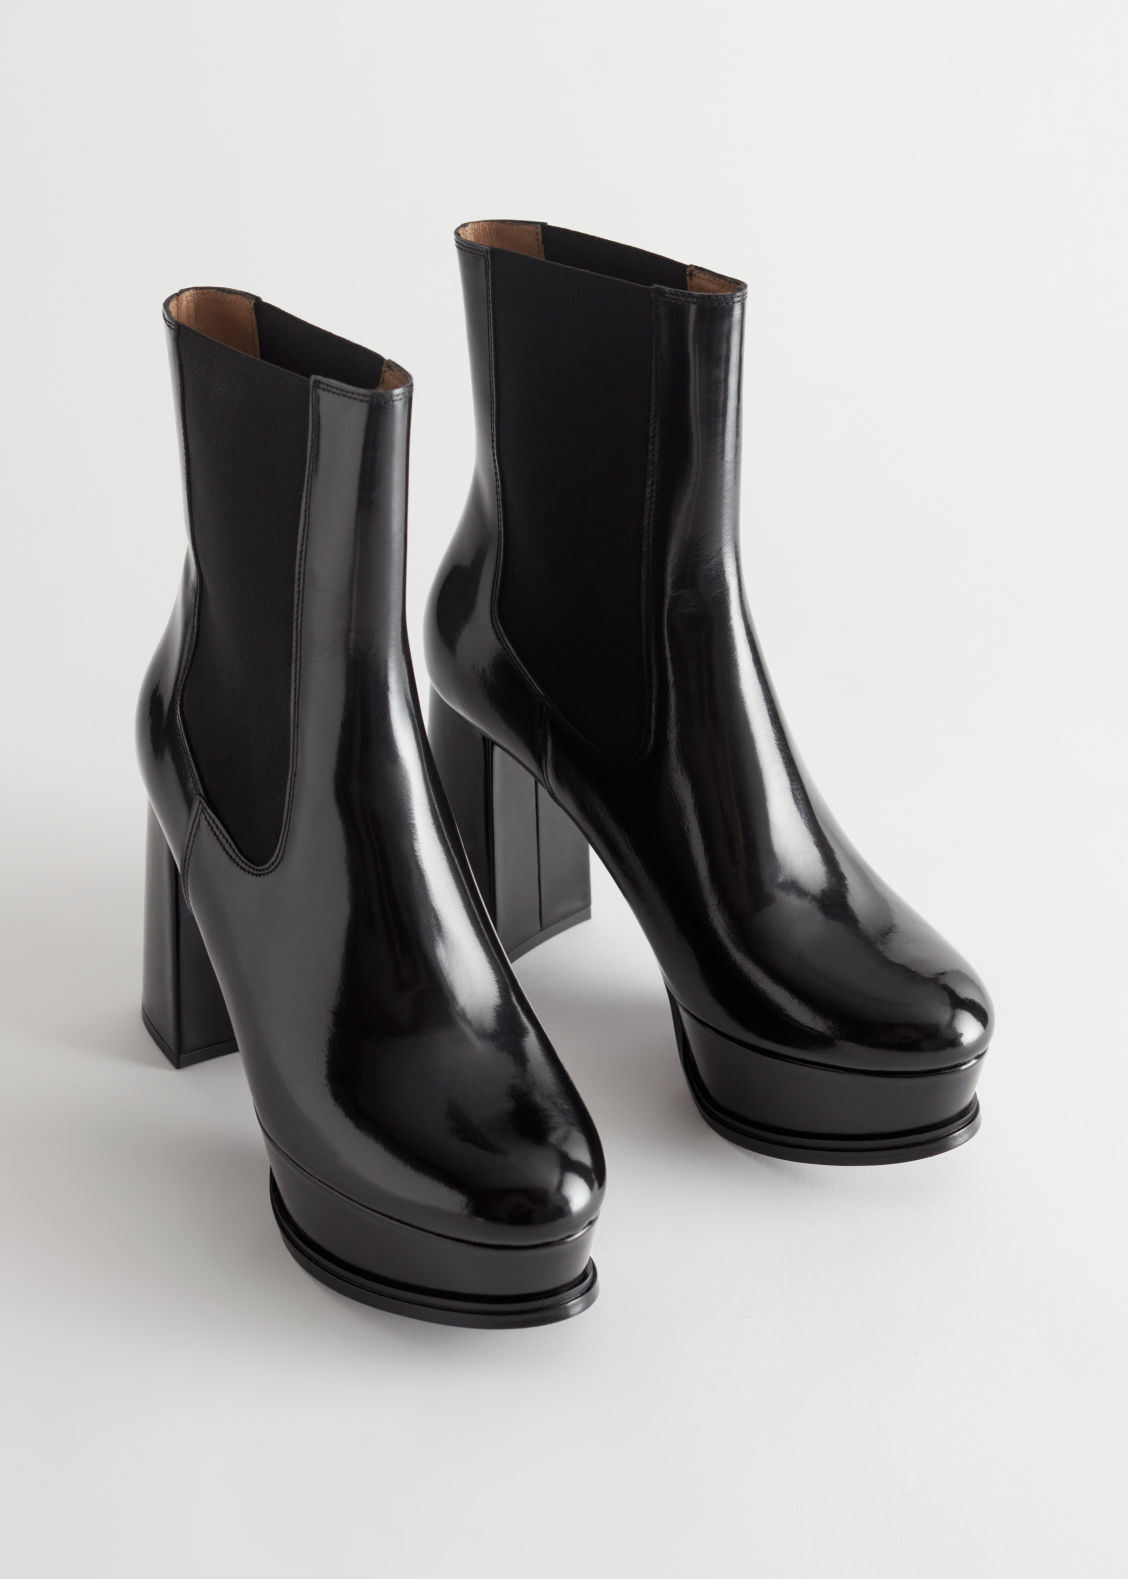 & Other Stories Leather Platform Boots